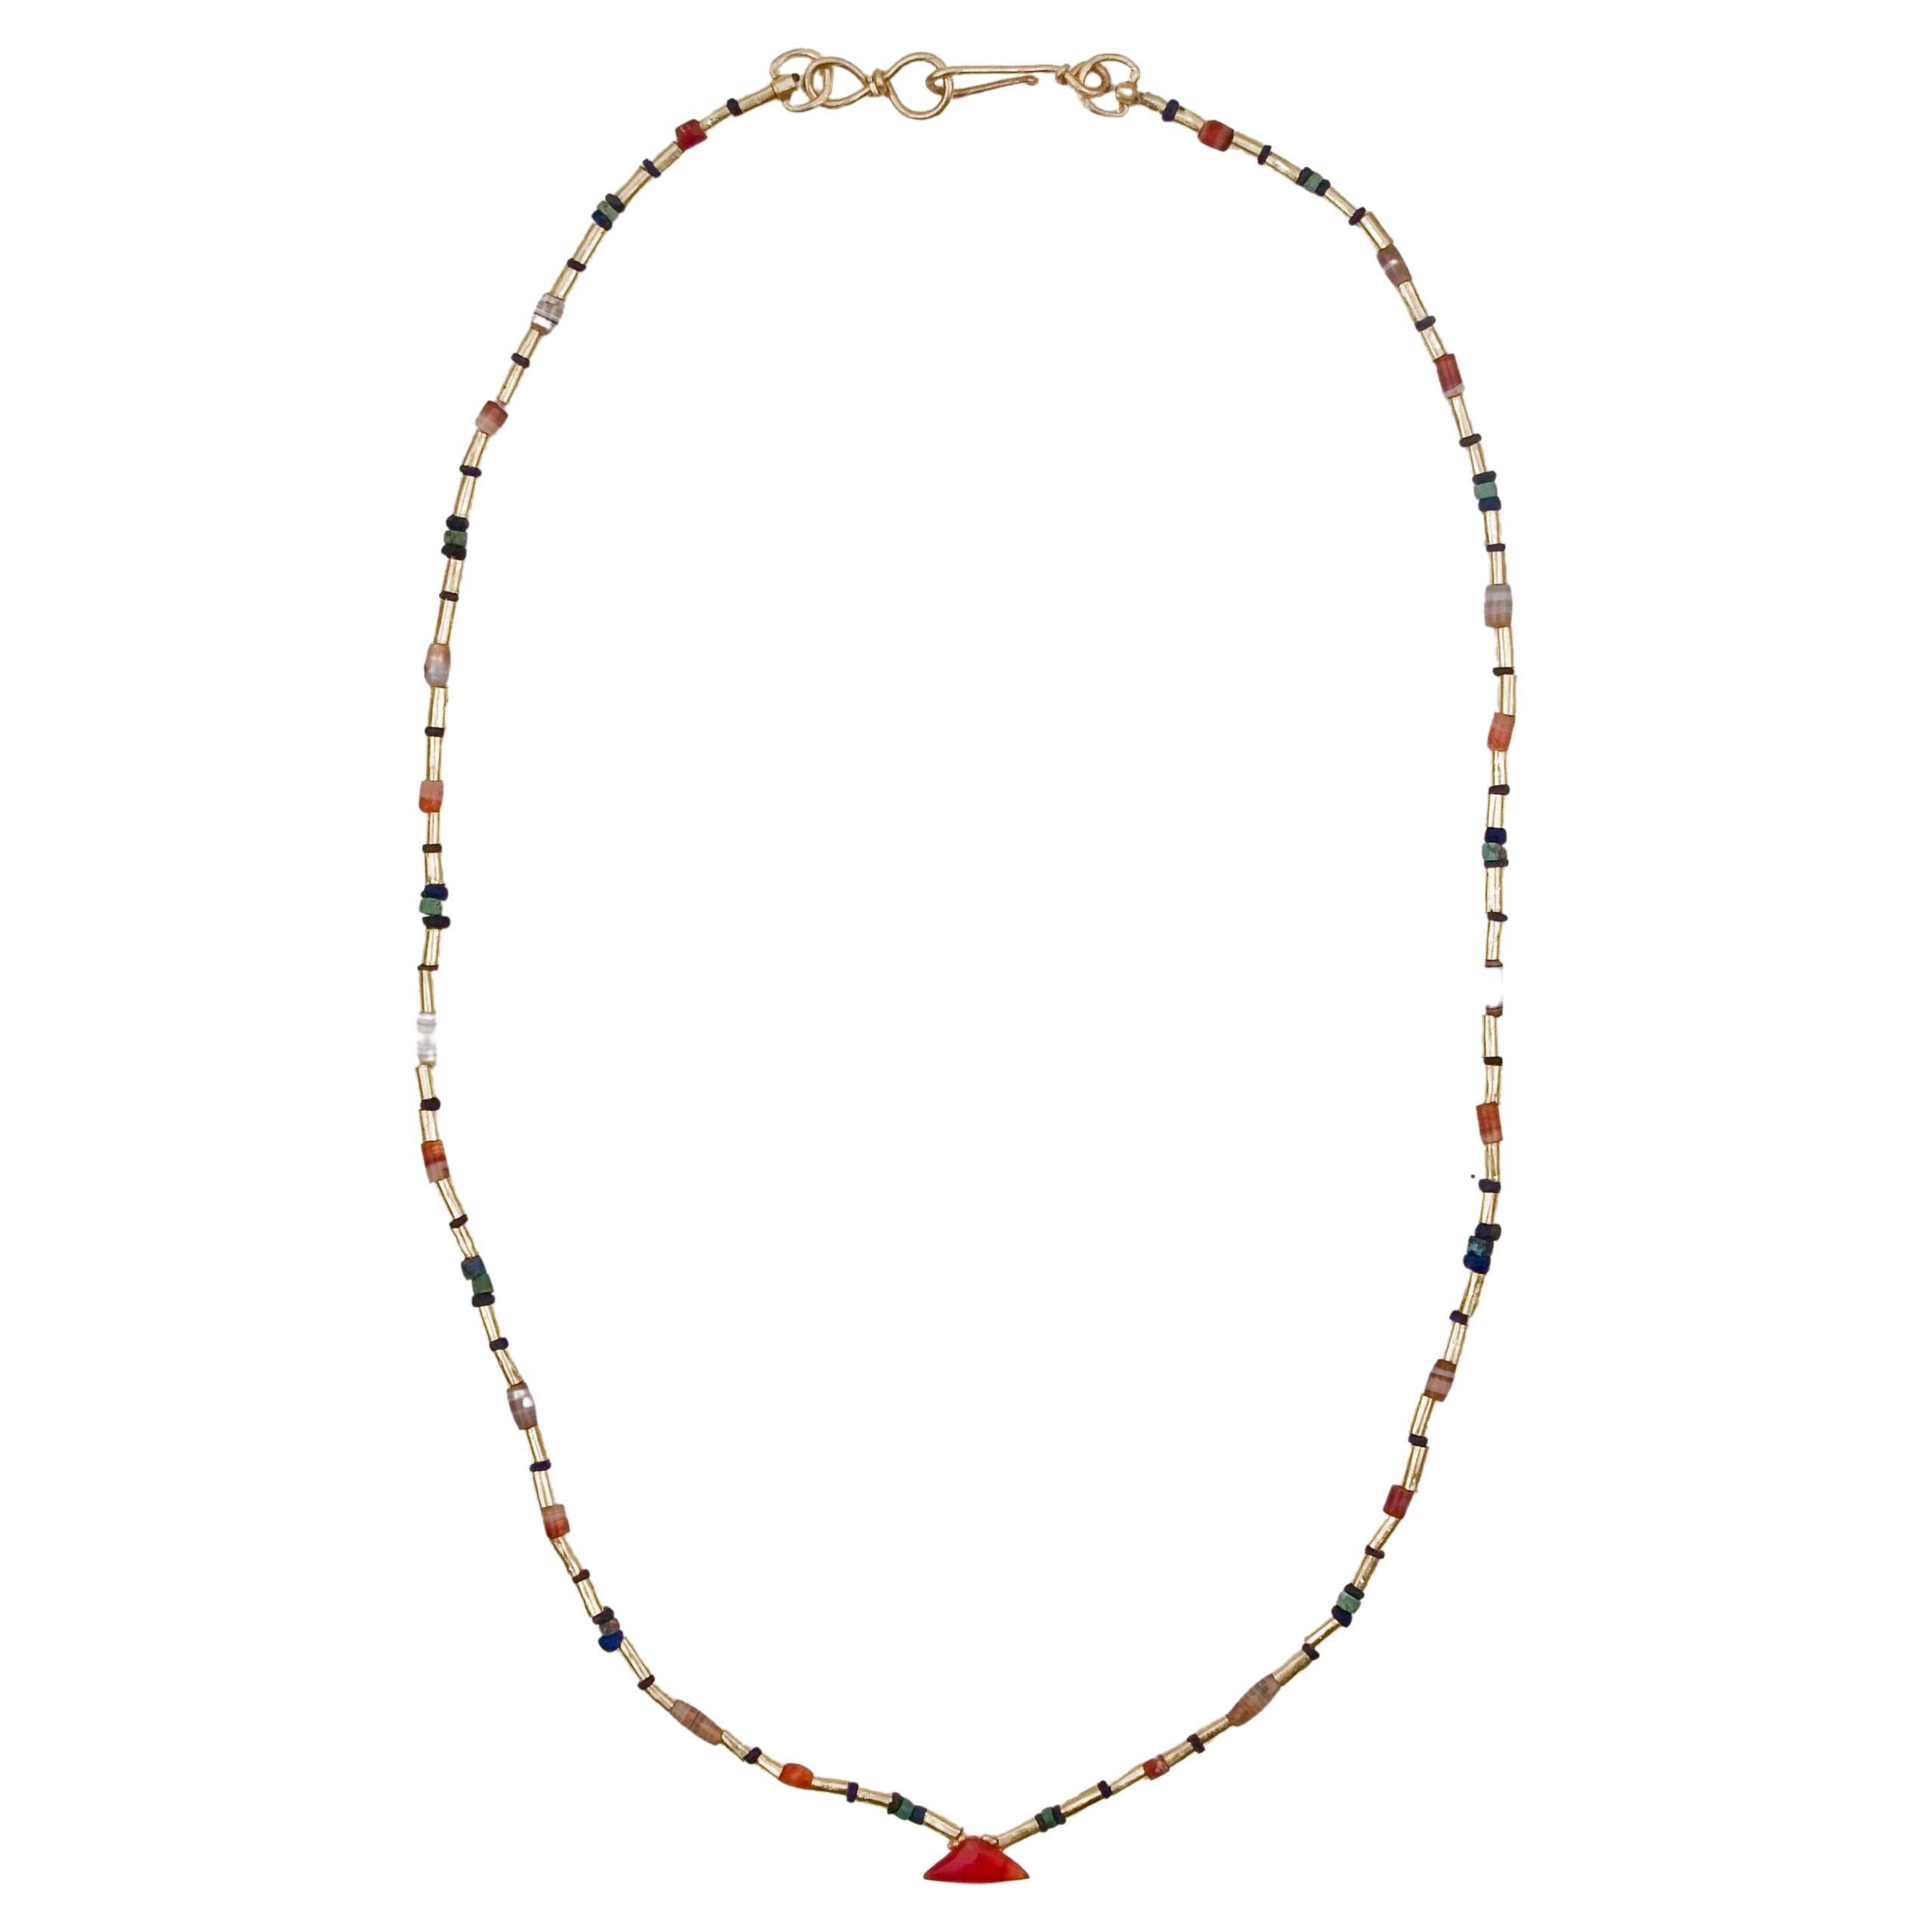 Ancient Lapis, Agate, Carnelian, and Turquoise Beads with 22k Gold and Pendant